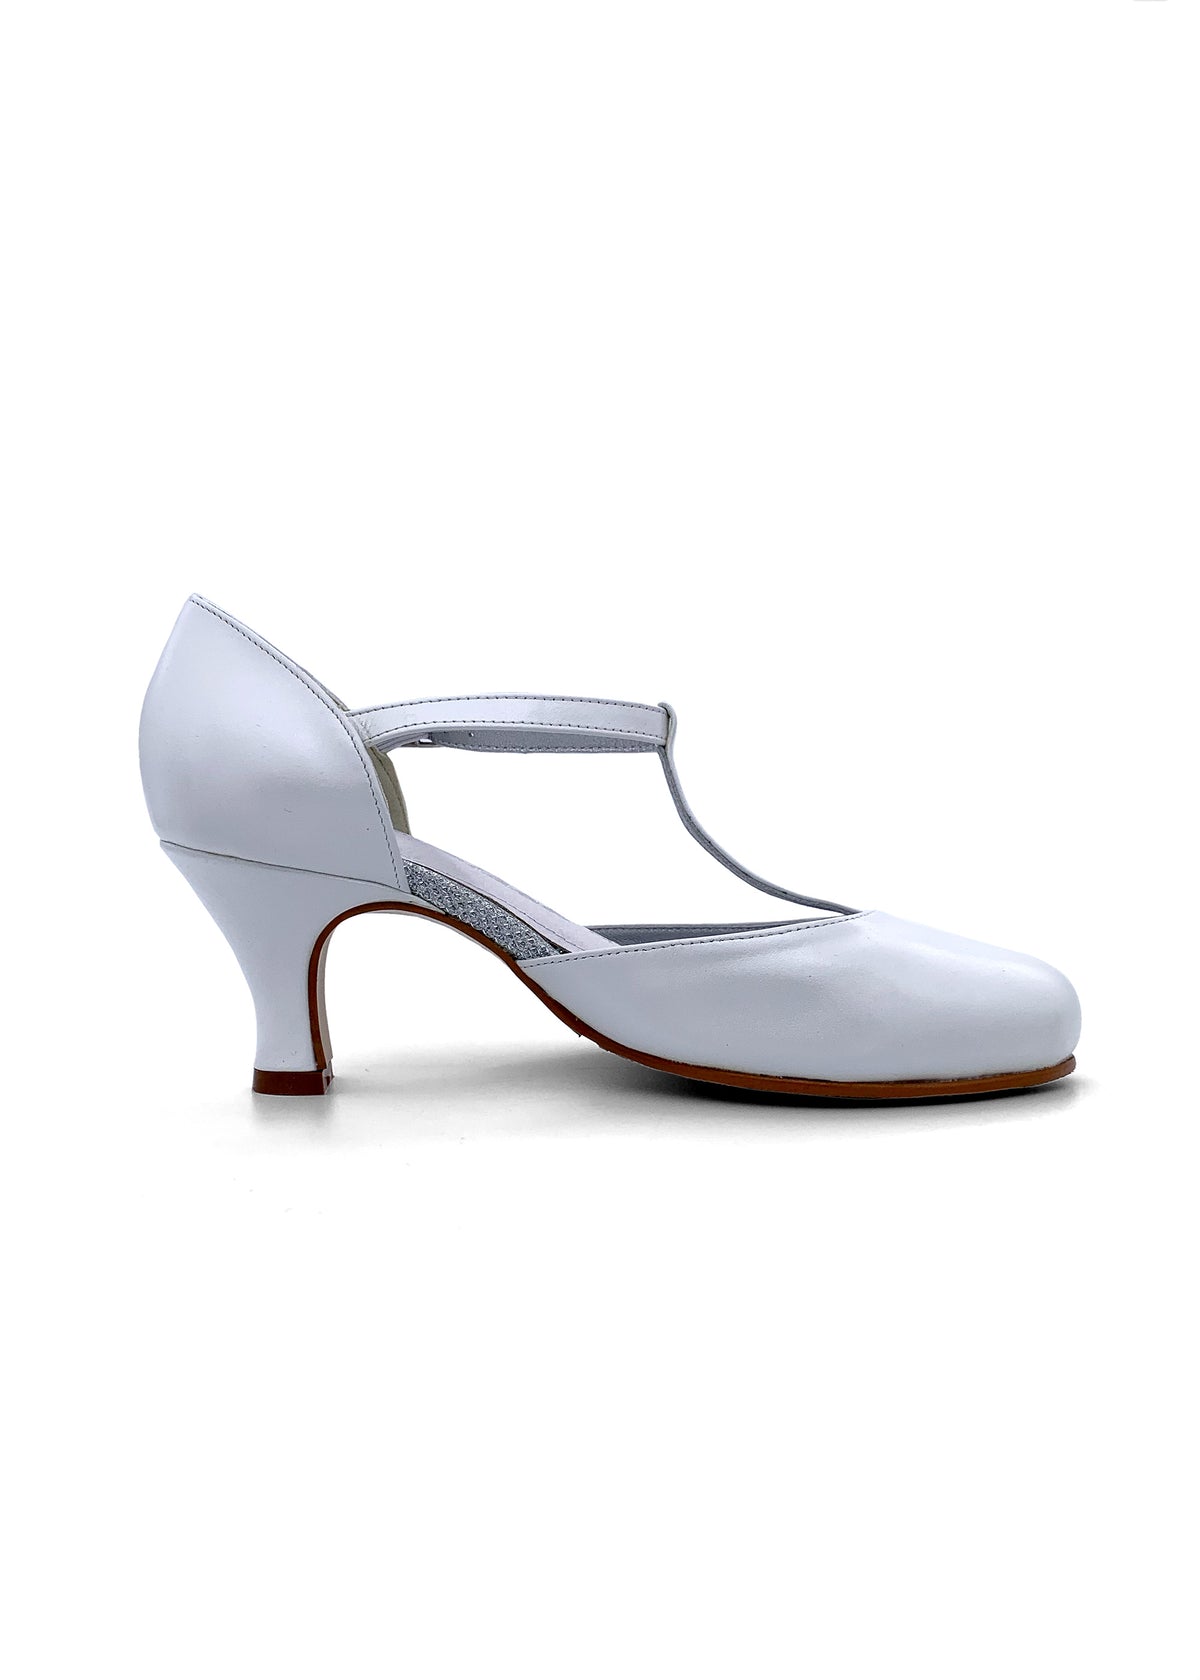 Open-toed shoes with ankle straps - white